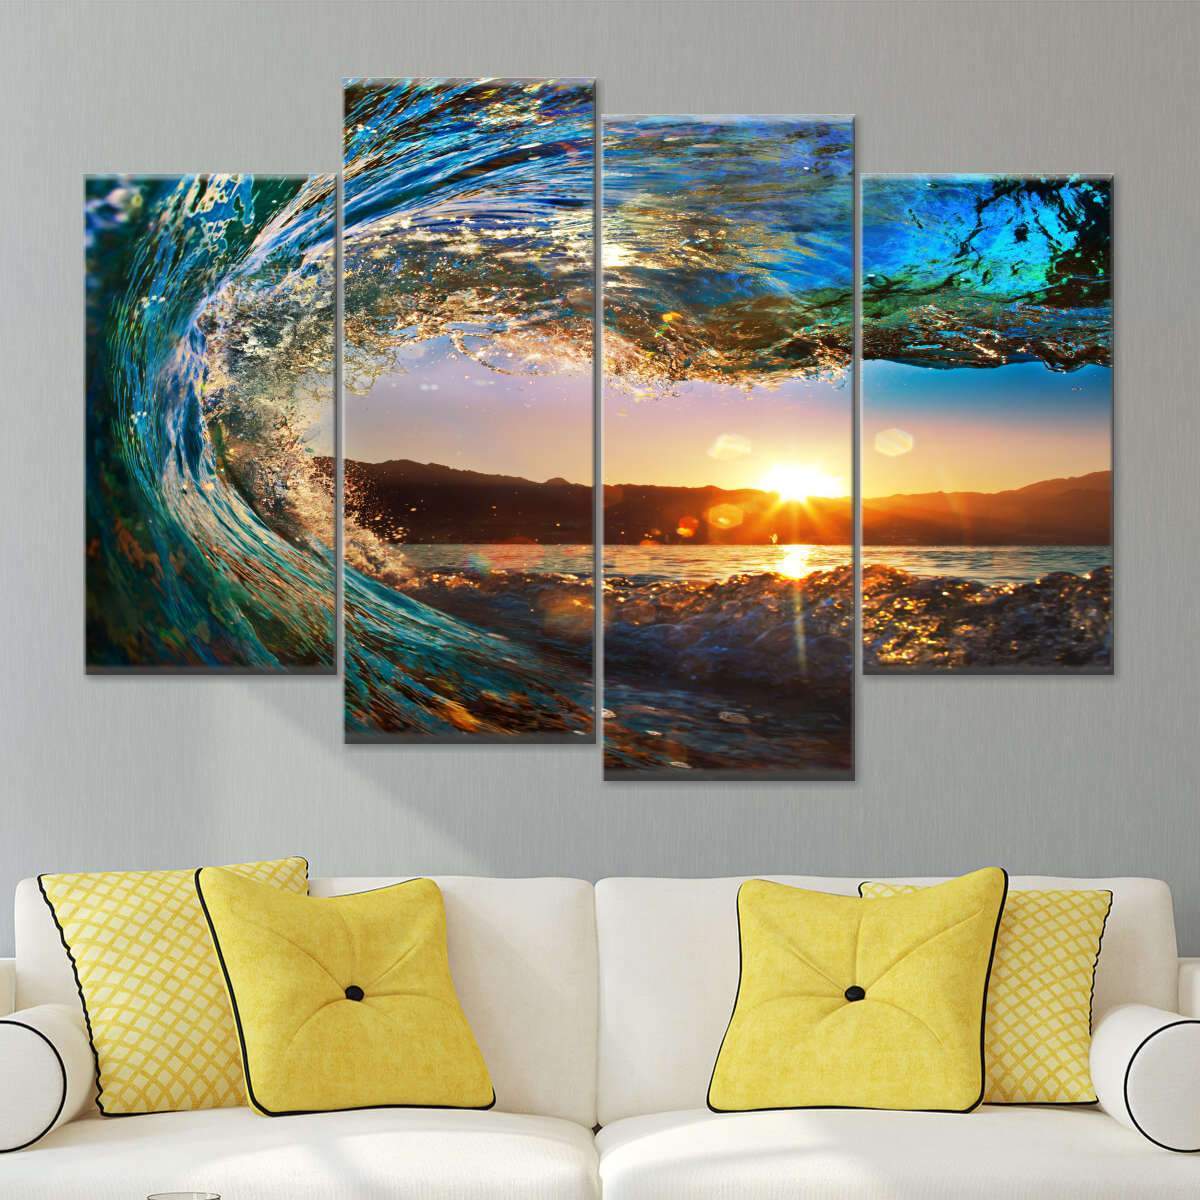 Wall26 - Square Canvas Wall Art - Clear Sea Waves Rushing to The Beach Viewd from The Sky - Giclee Print Gallery Wrap Modern Home Decor Ready to Hang